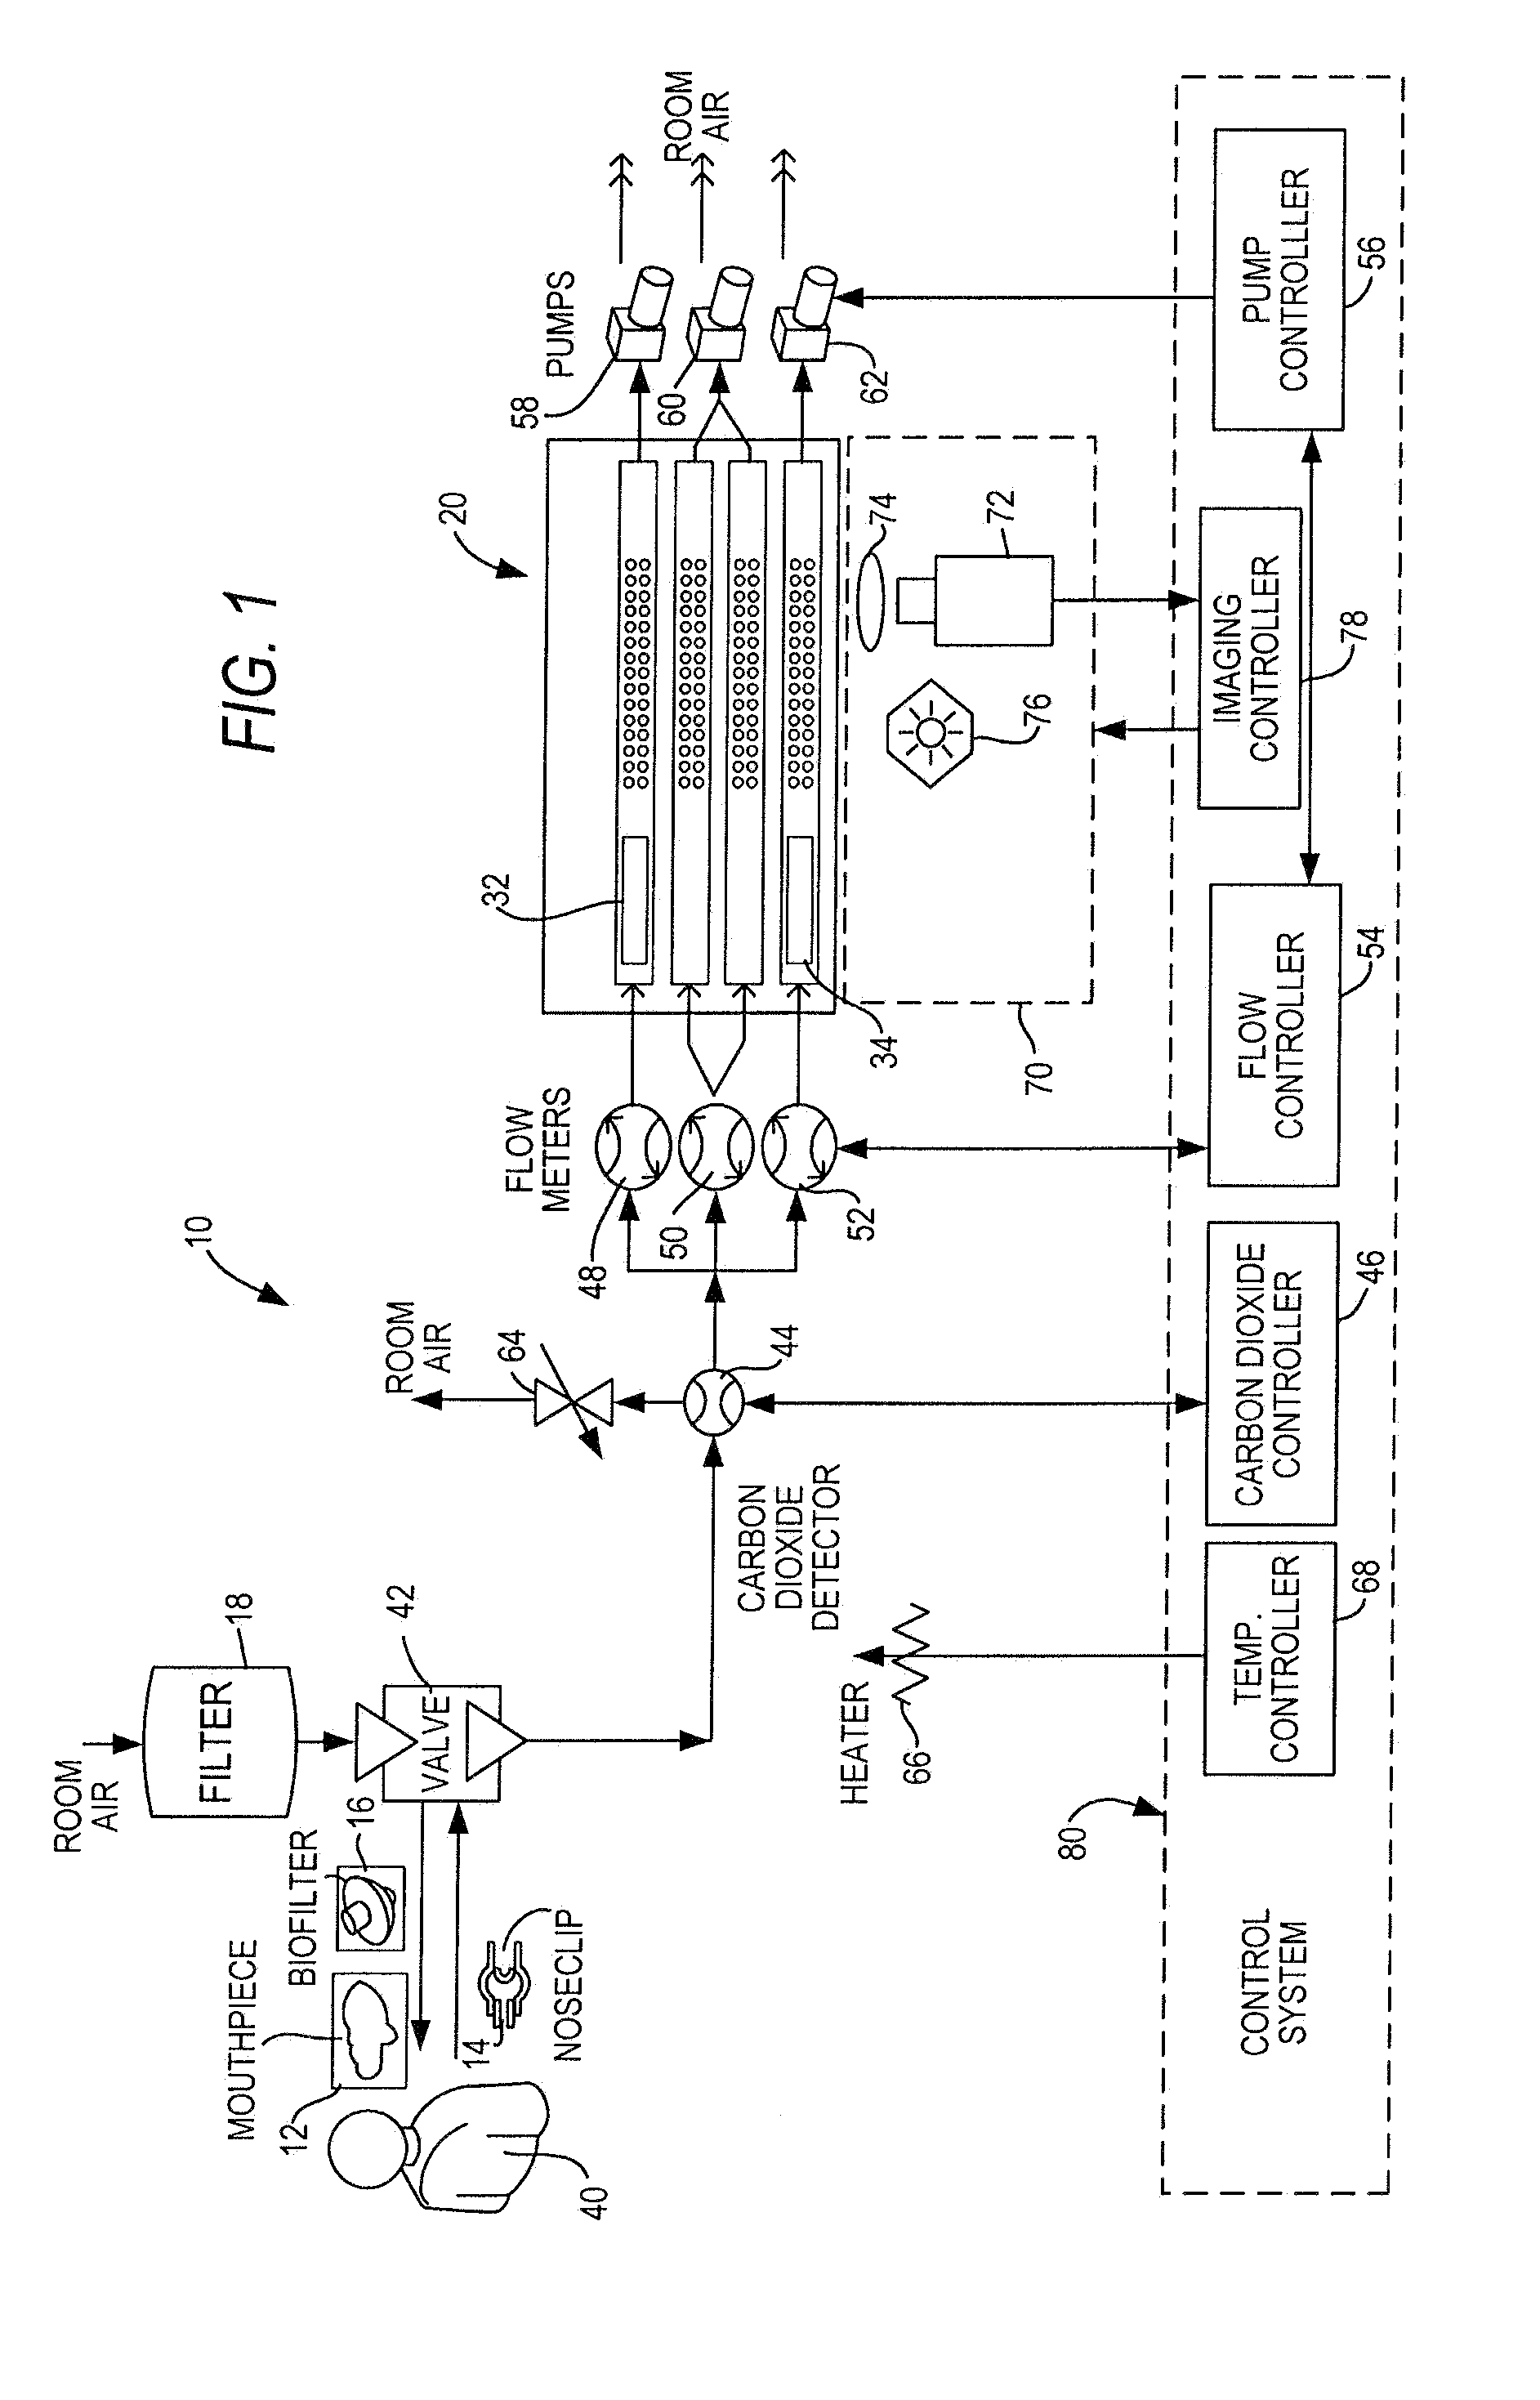 Method of and apparatus for detecting upper respiratory bacterial infection from exhaled mammalian breath and colorimetric sensor array cartridge